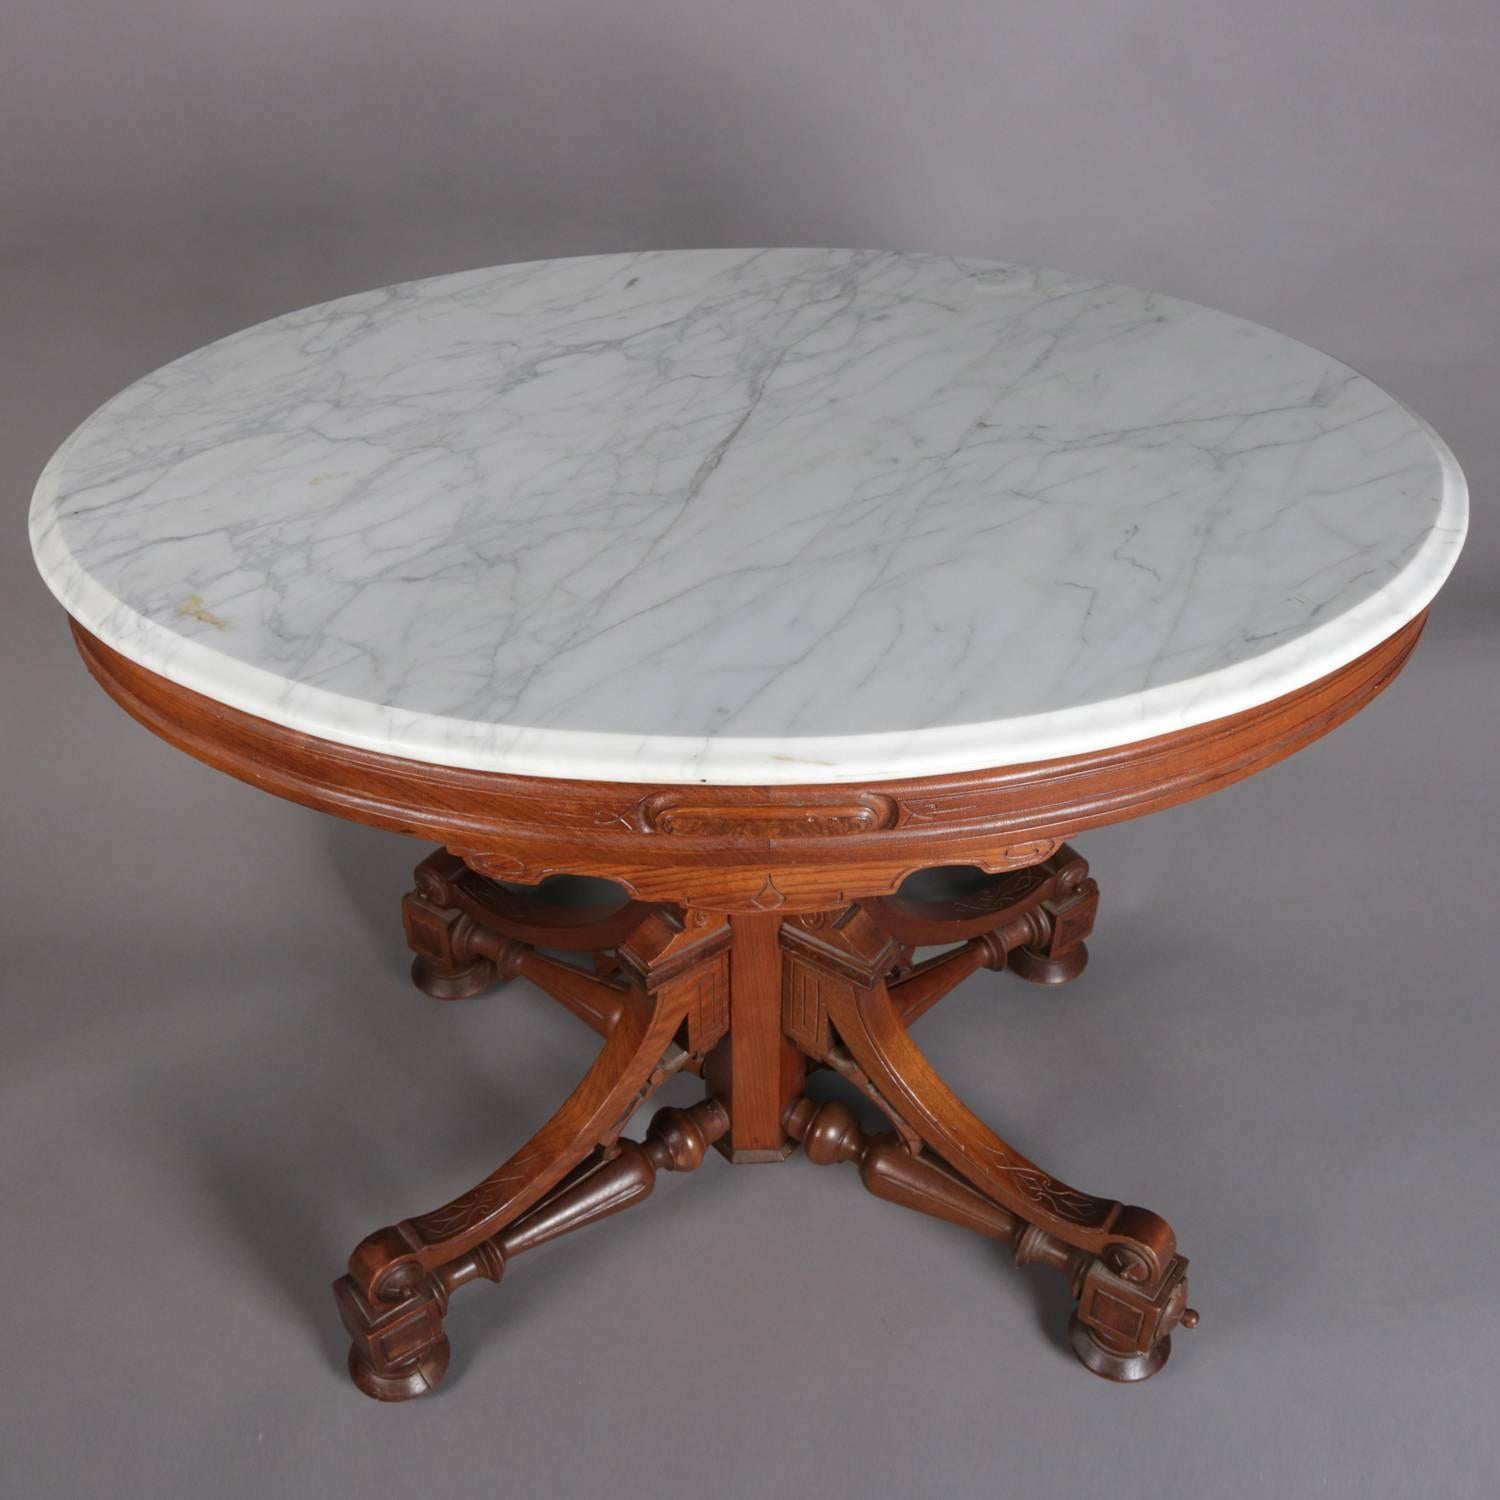 Antique Eastlake Victorian carved walnut parlour table features carved and incised apron supporting bevelled marble top, raised on elaborate pedestal with scroll, turned and incised elements, 19th century.

Measures: 20